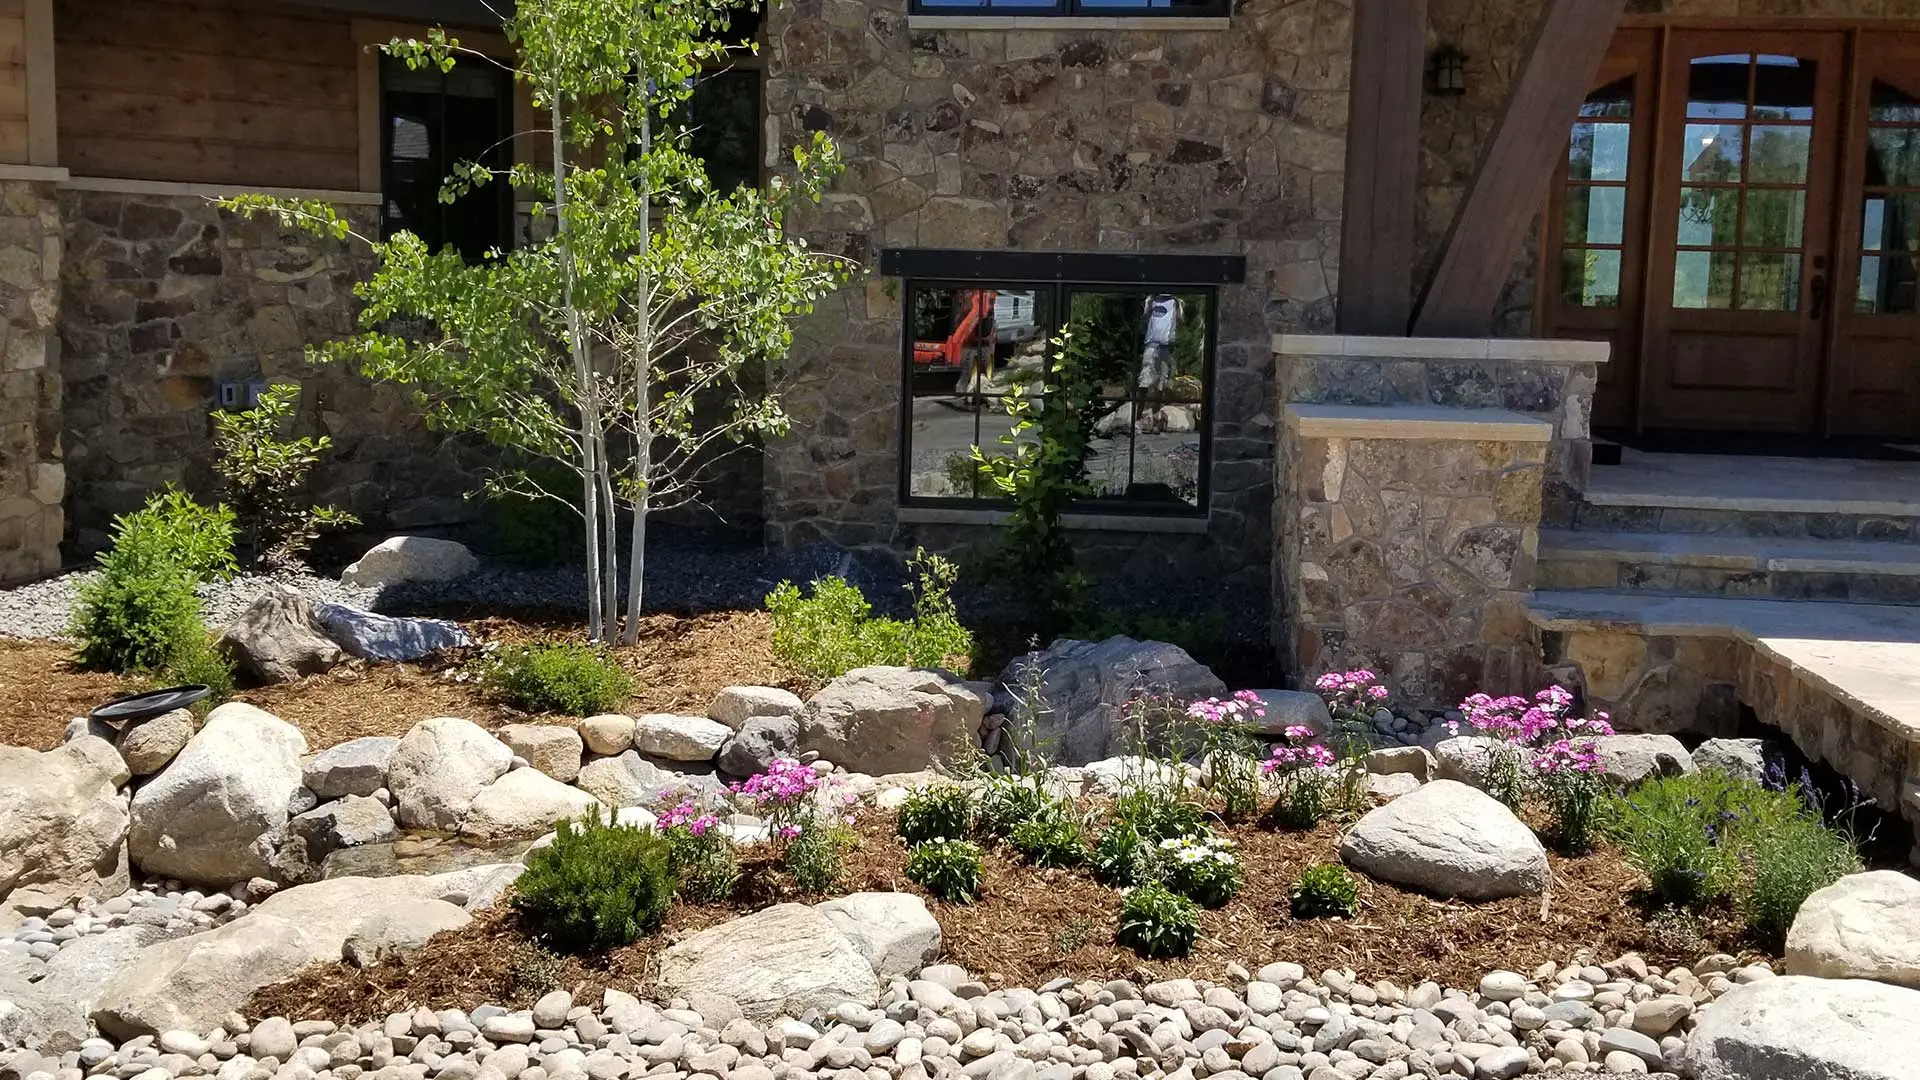 Landscaping in the front of a satisfied customer's home.